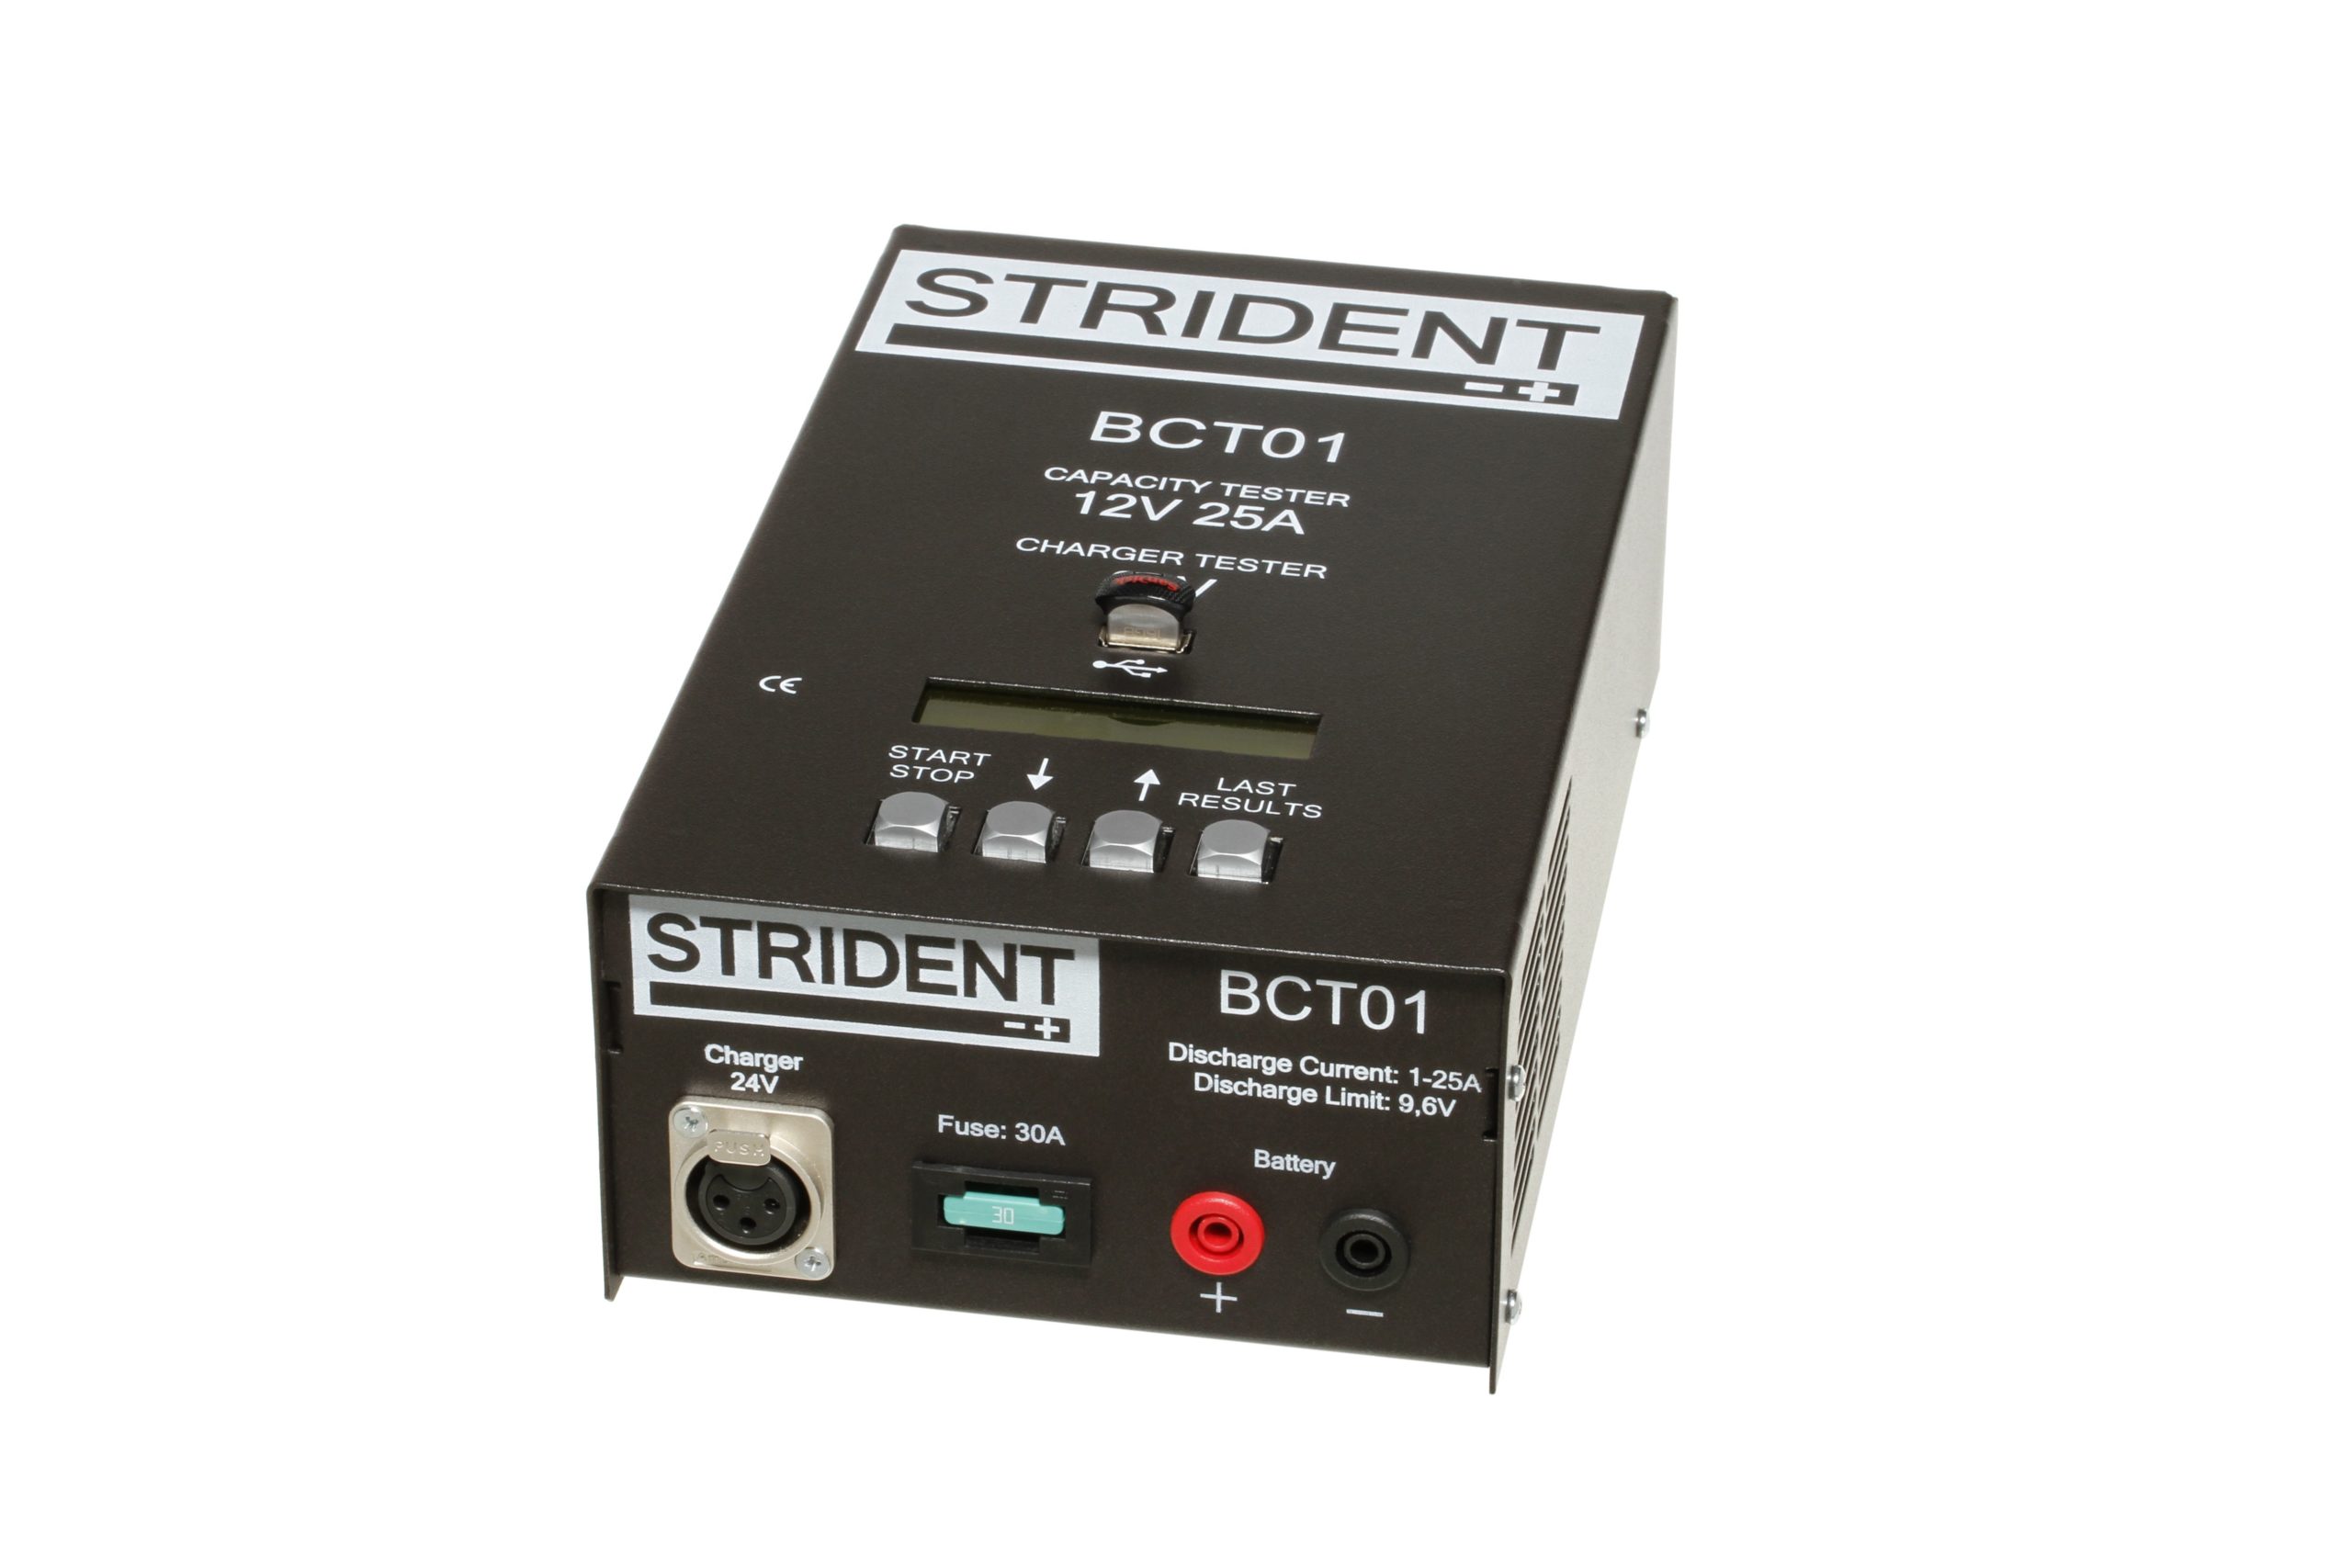 Strident Capacity and Charger Tester